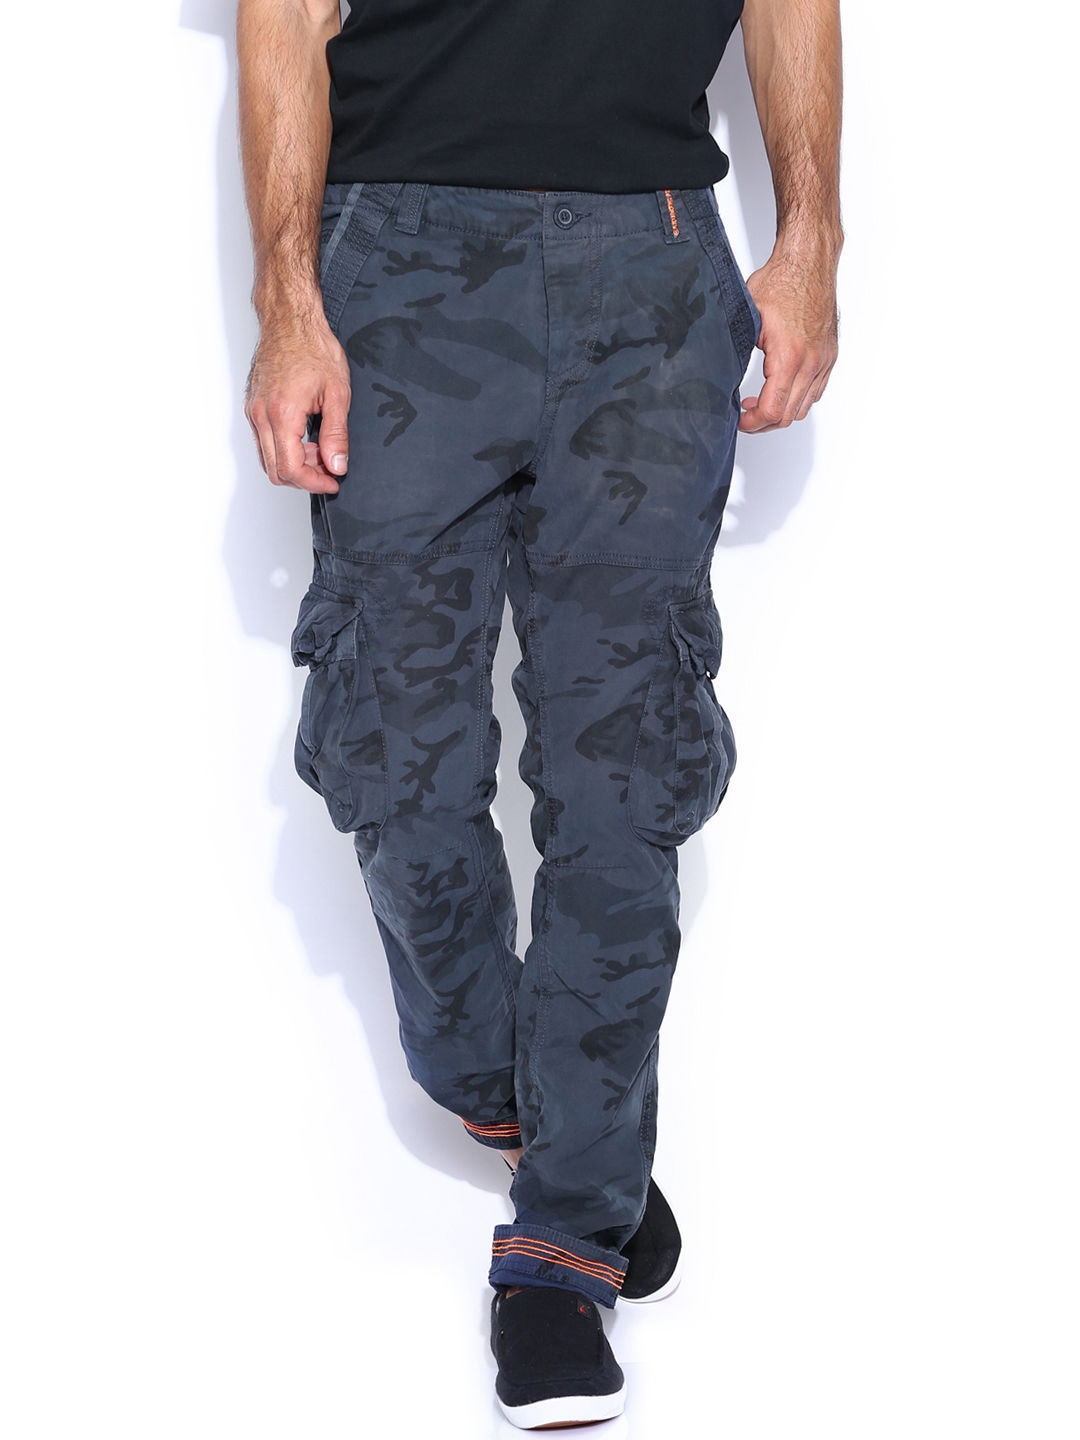 Sapper Cargos  Buy Sapper Mens Navy Blue Solid Cotton Cargo Pant Online   Nykaa Fashion